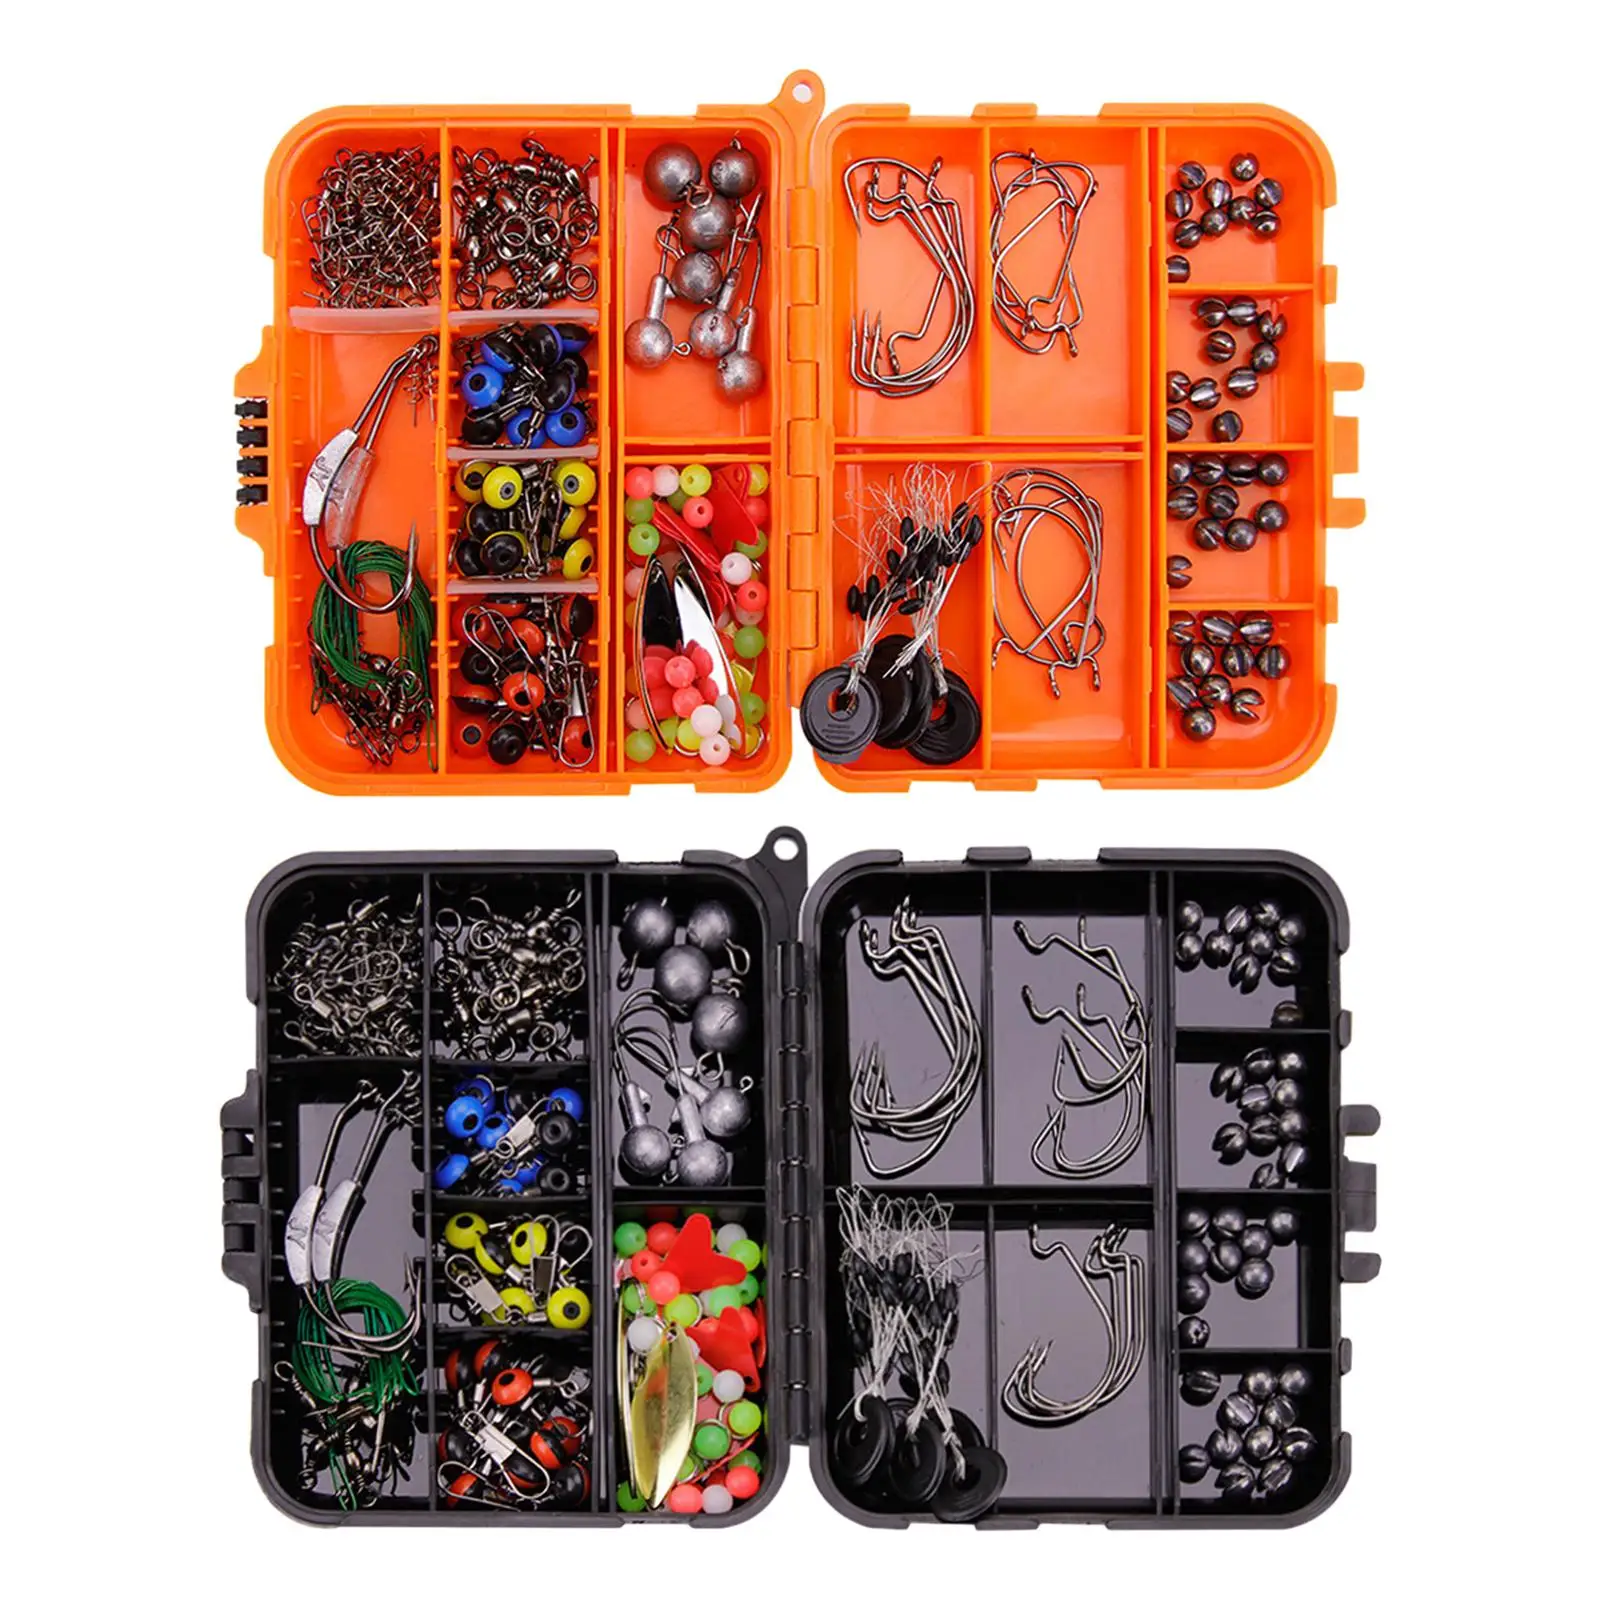 Fishing Tackle Accessories Kit 213X with Tackle Starter Fishing Equipment